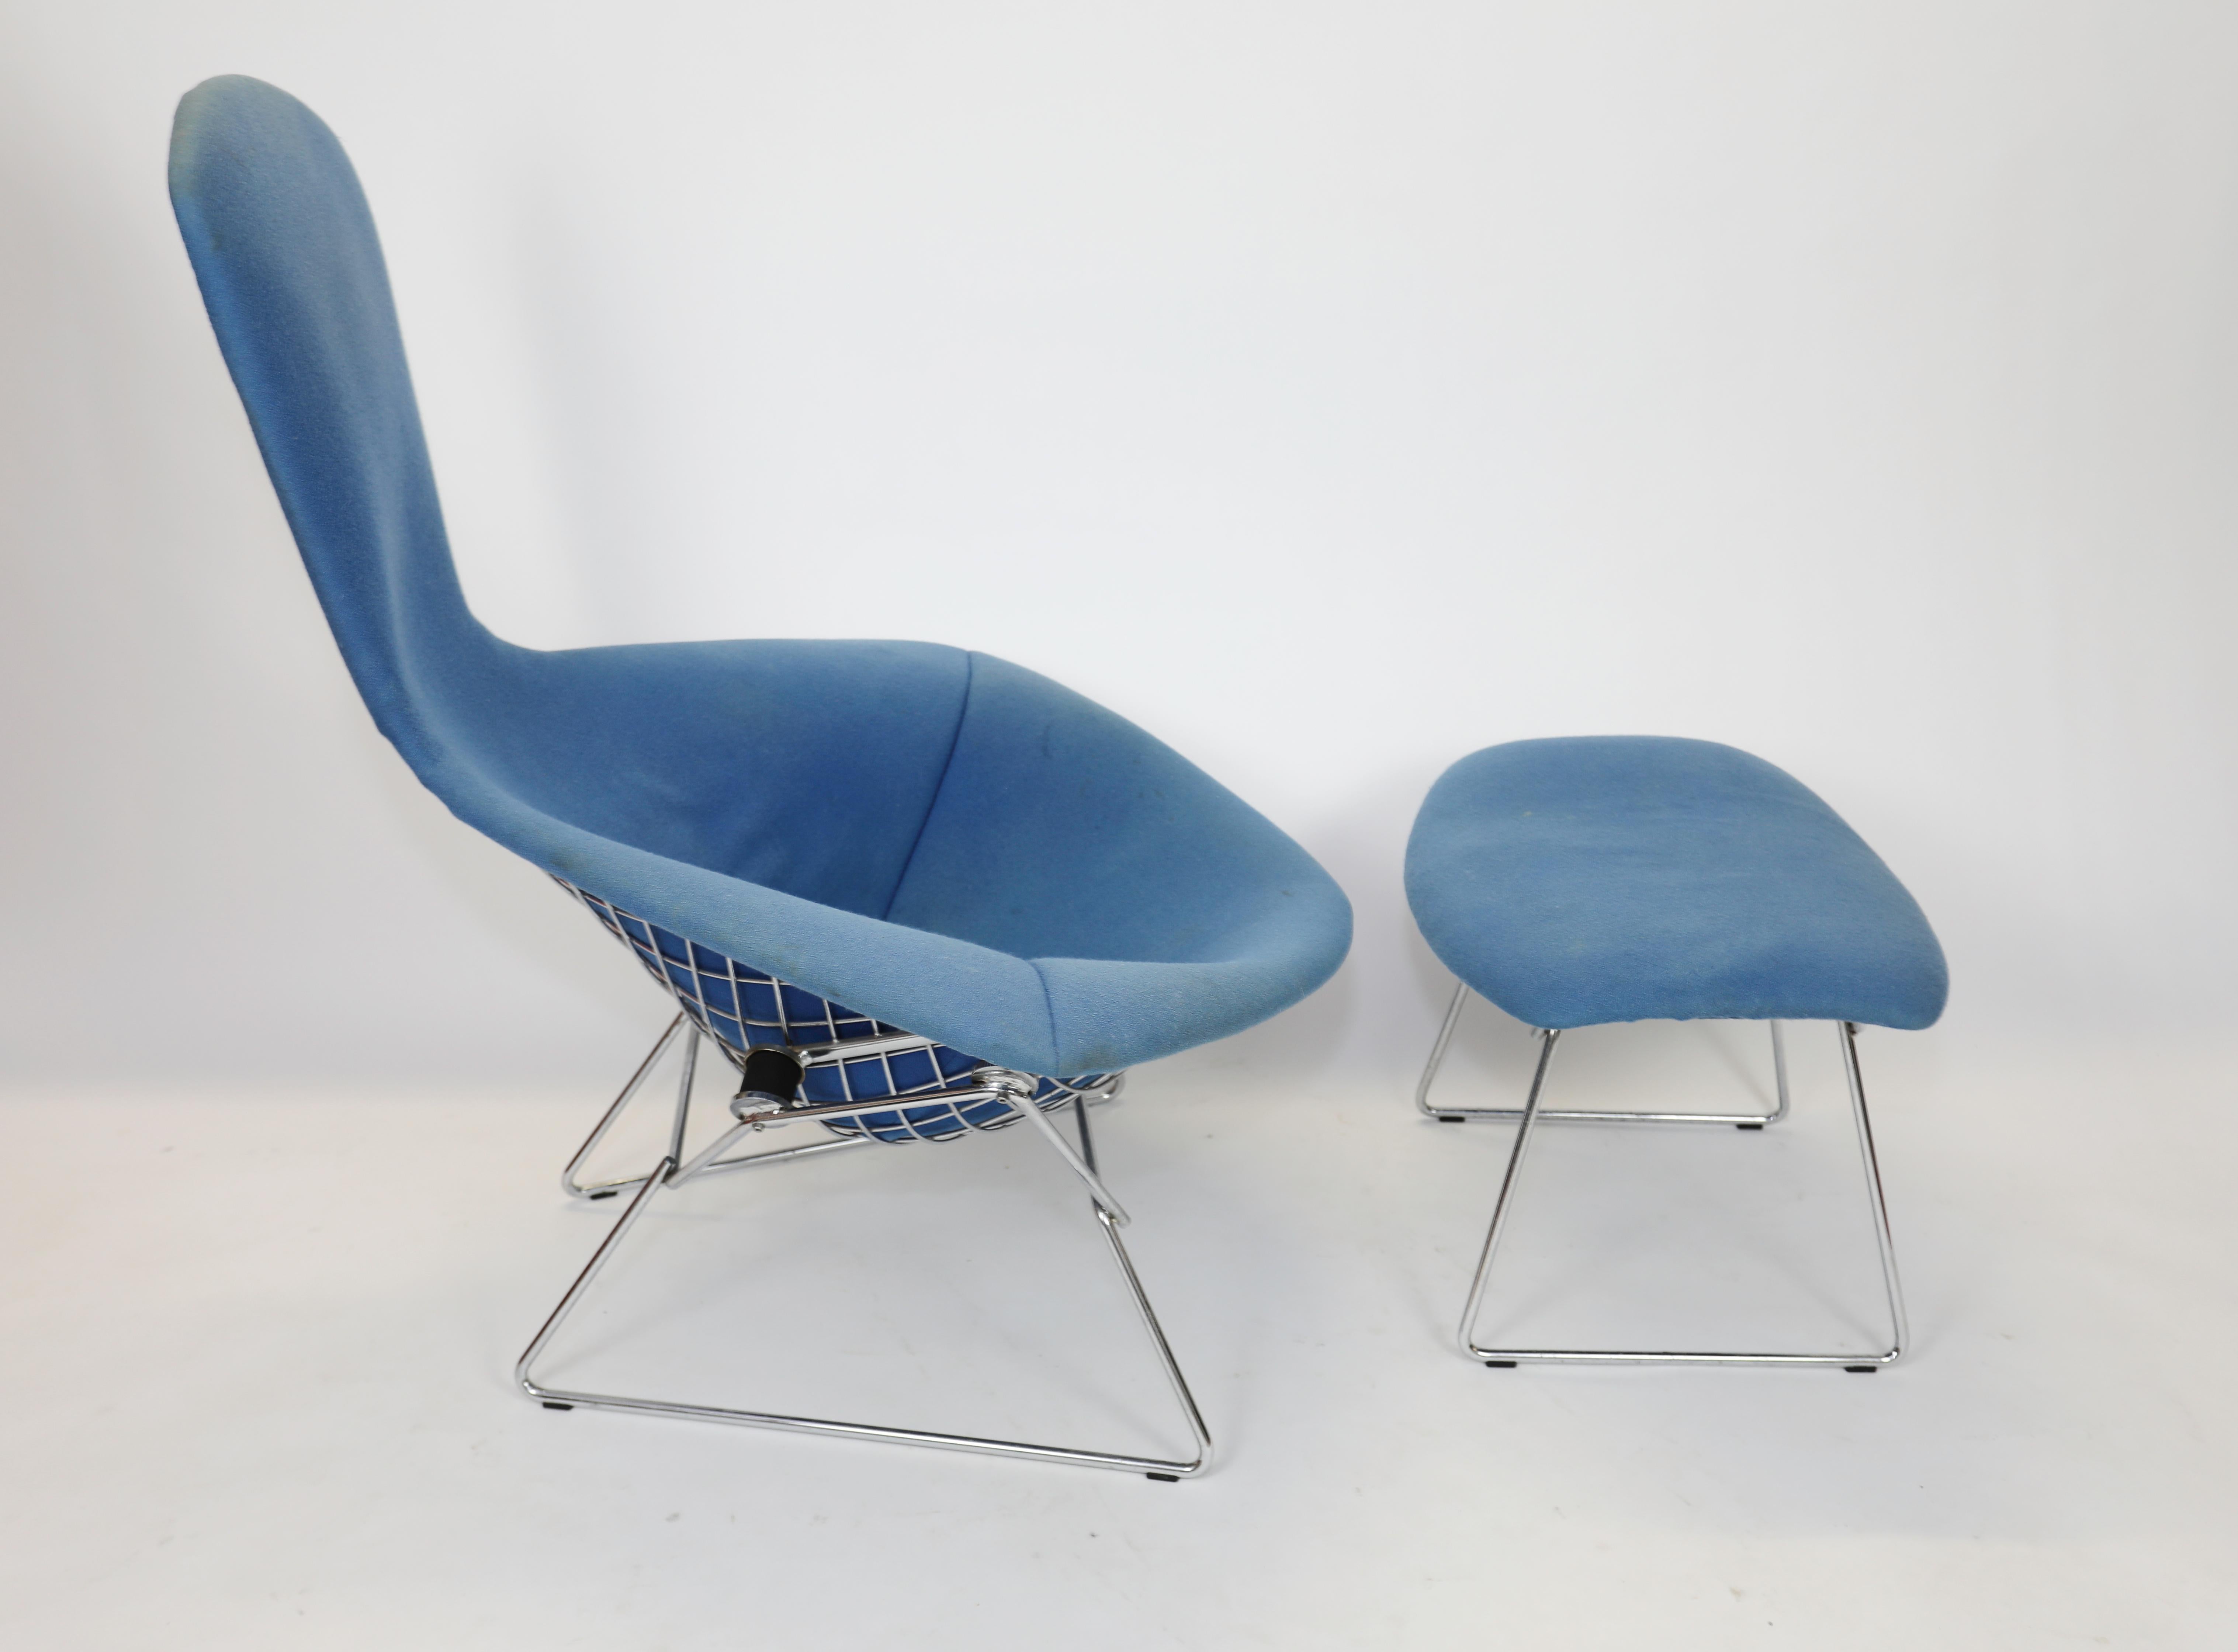 Original bird chair and ottoman
Manufactured by Knoll International C.1975
Fabric needs updating
Chair is priced as is because of condition.